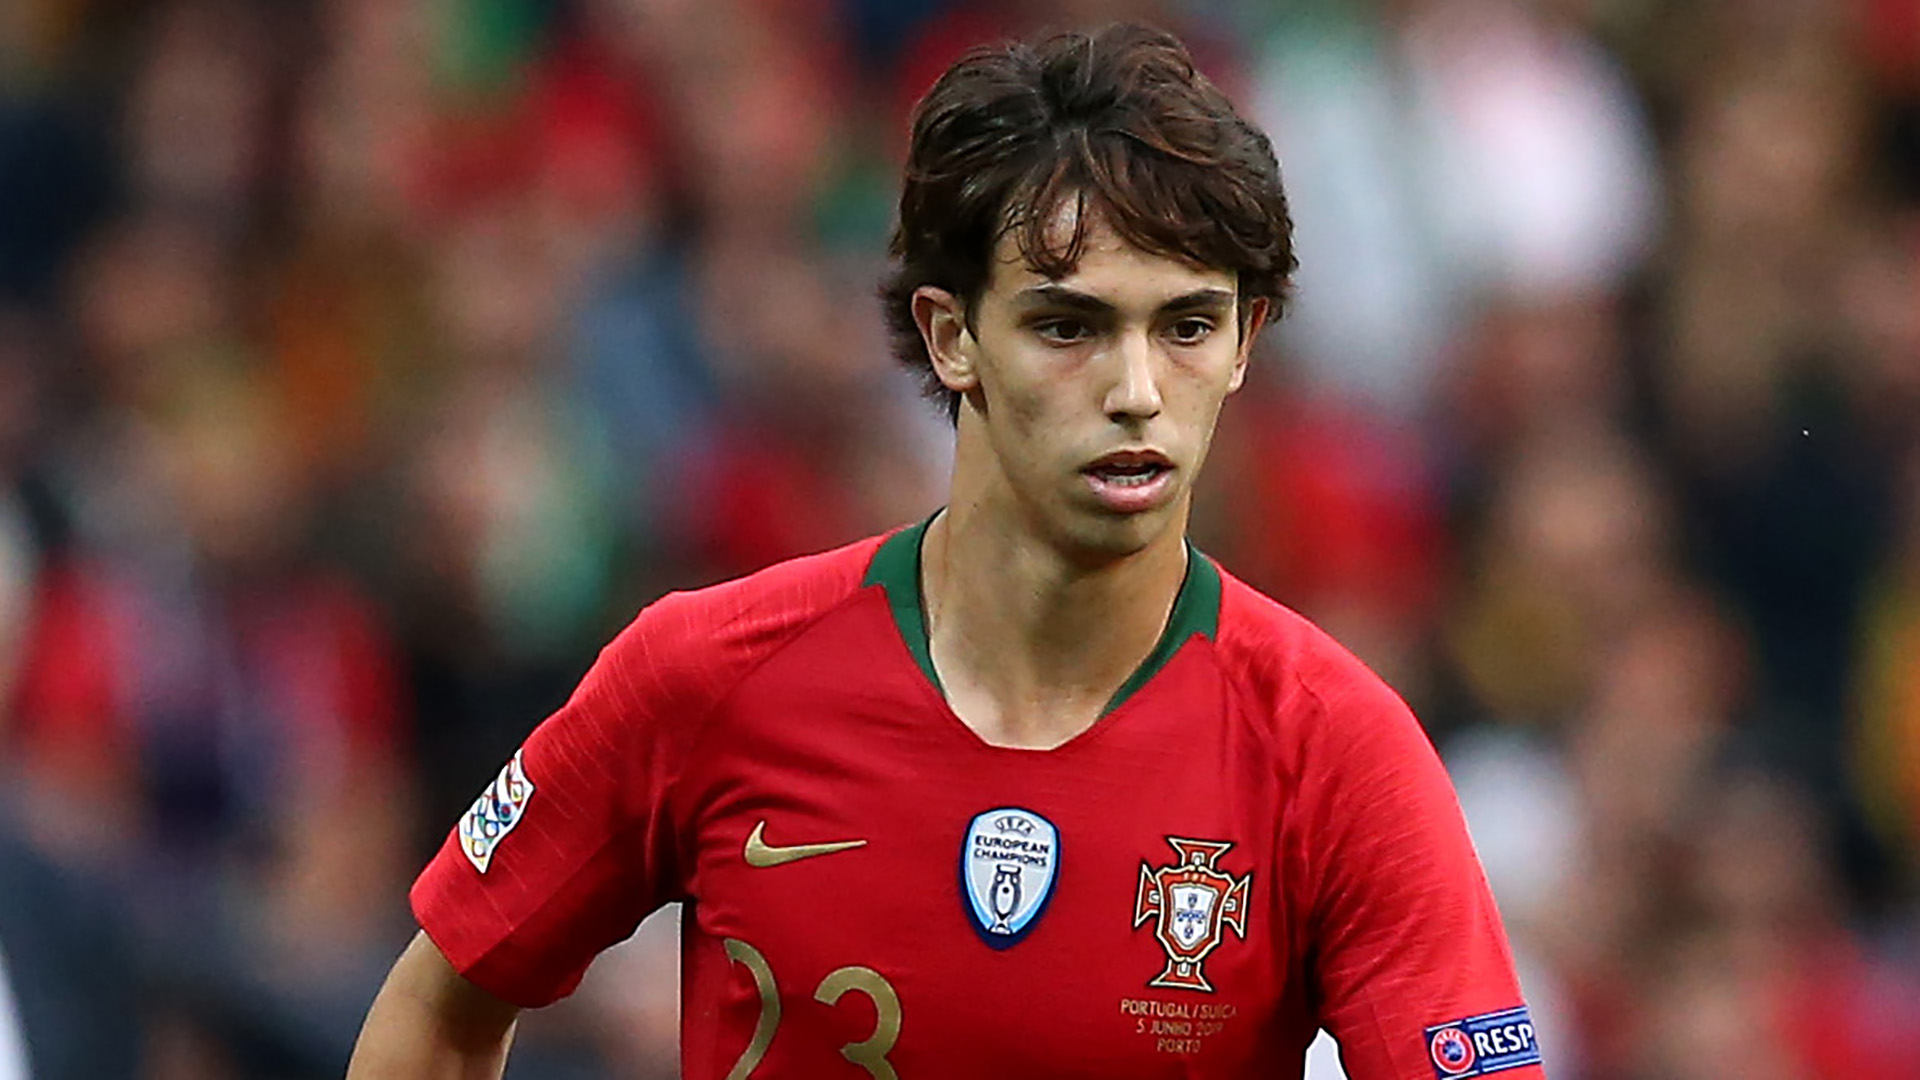 Transfer news: Joao Felix drops Premier League move hint & is asked about future switch to Tottenham | Goal.com United Arab Emirates